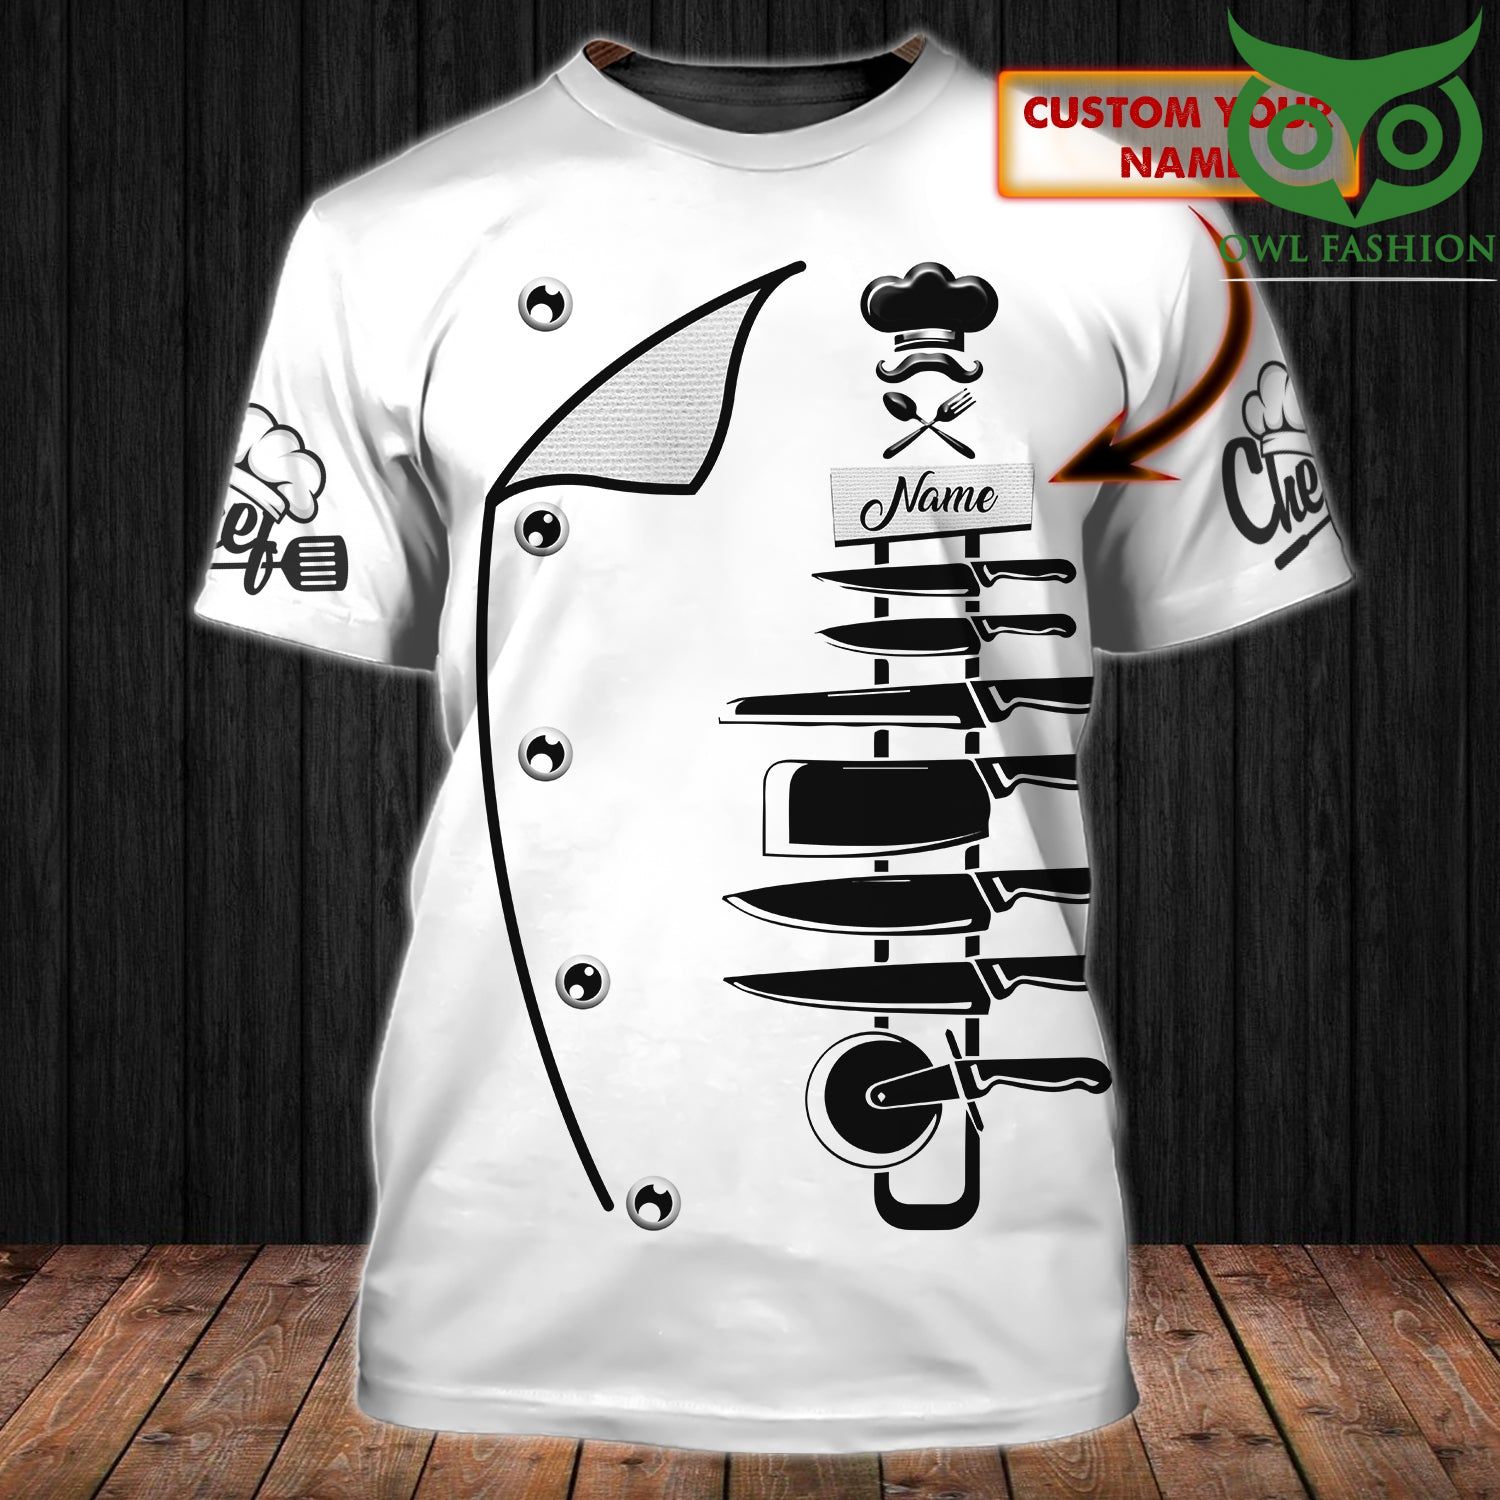 10 CHEF Knives Personalized Name white 3D Tshirt